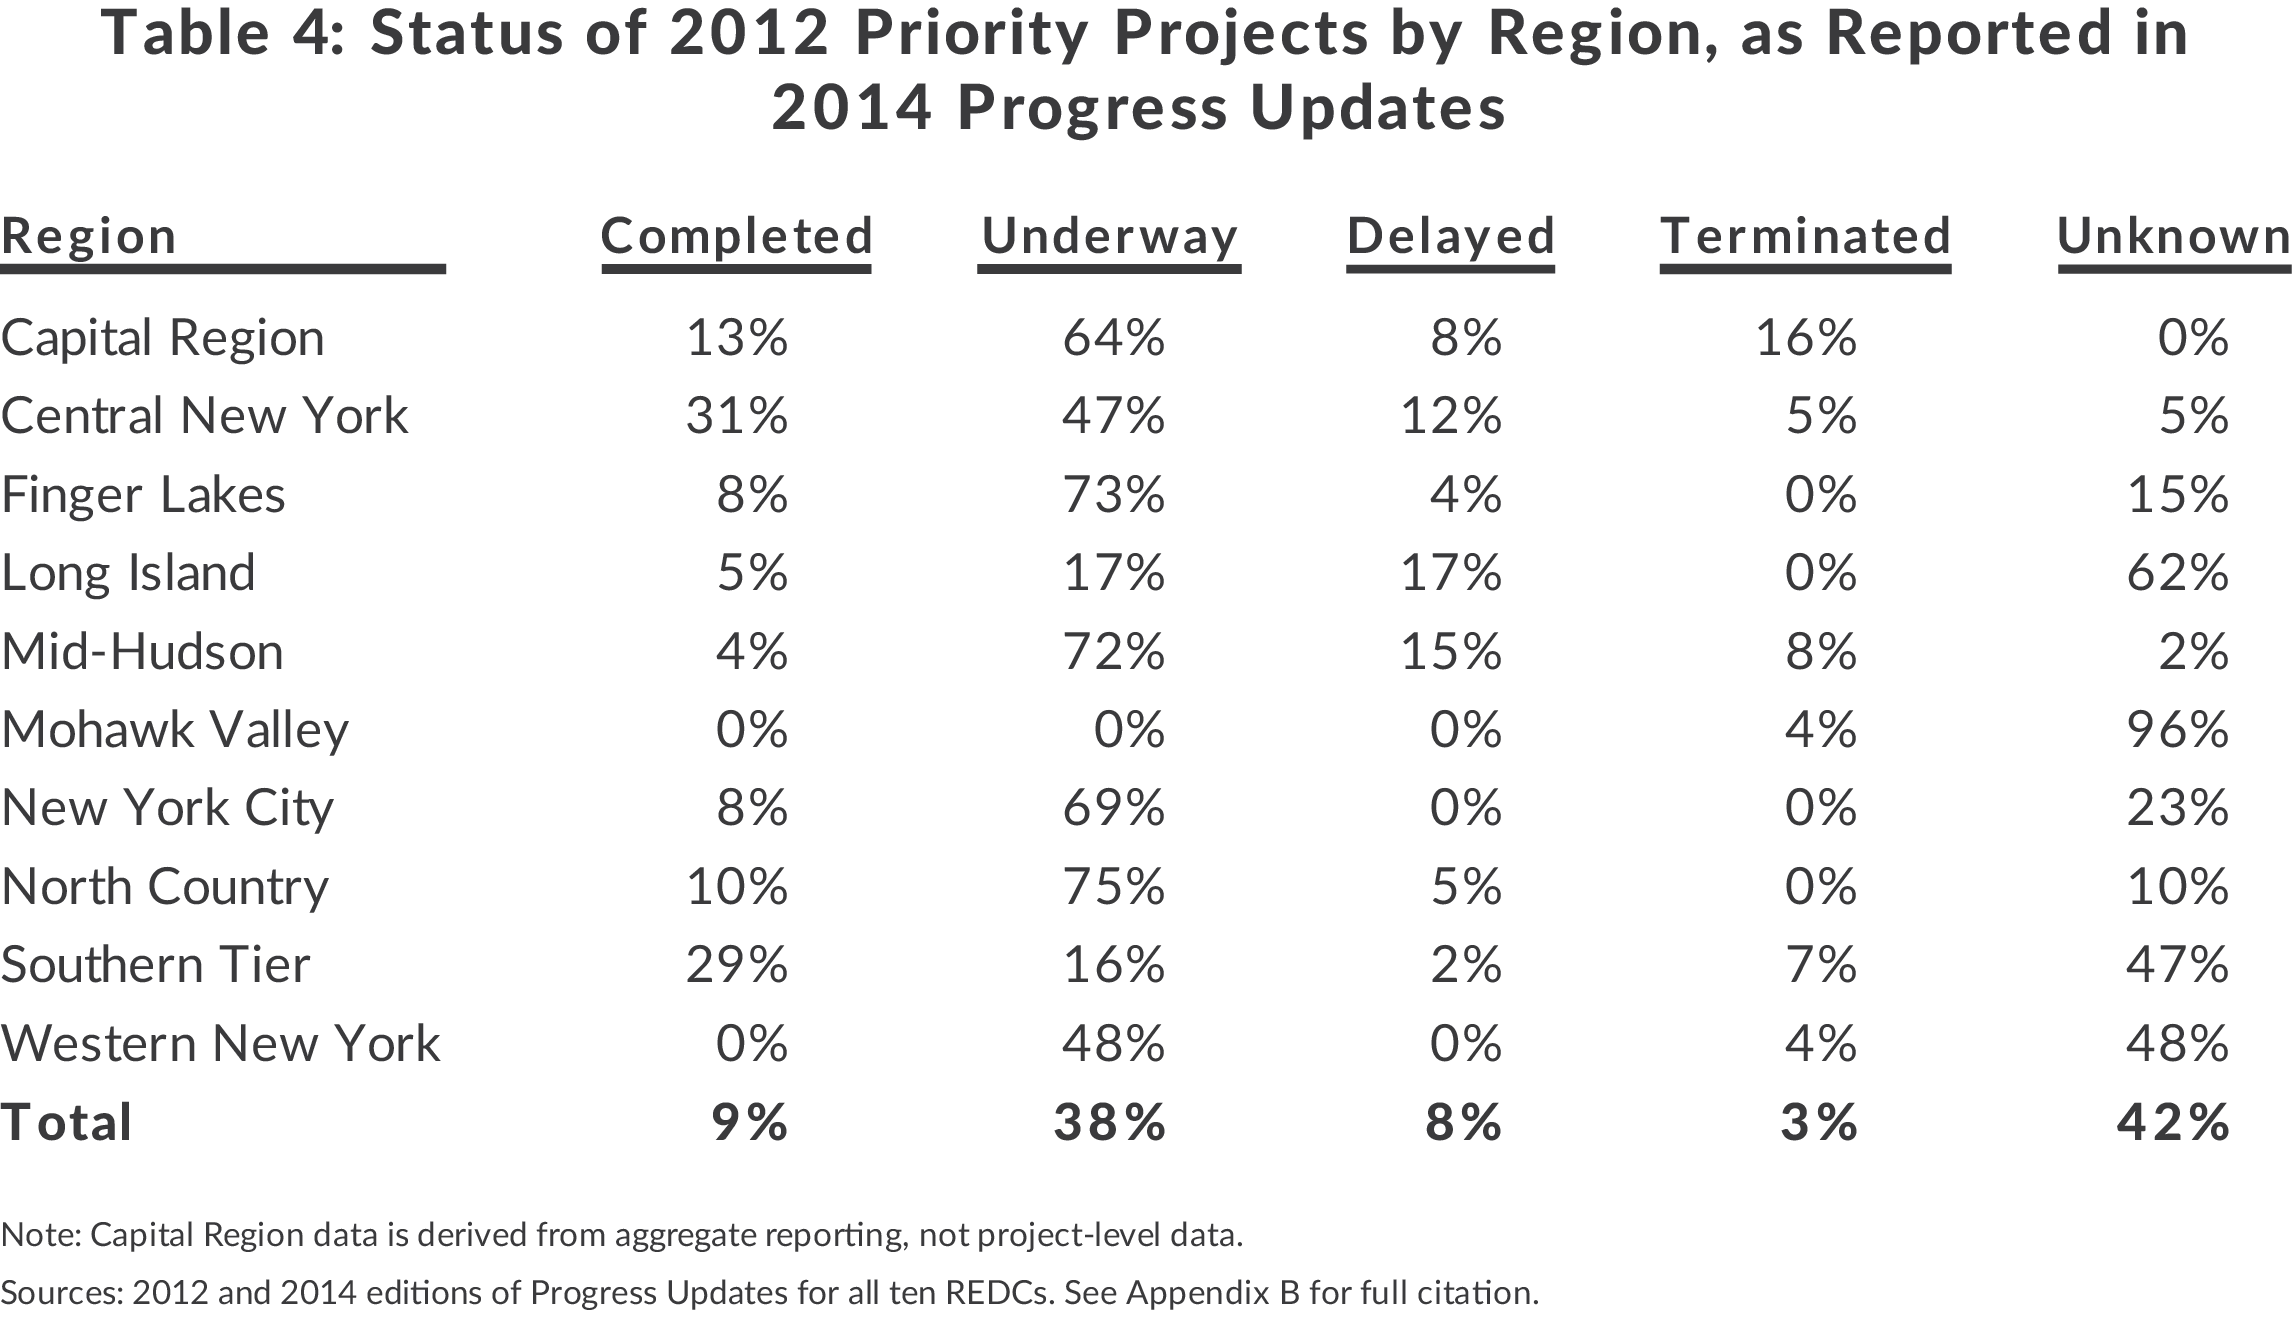 Table of status of 2012 priority projects by Regional Economic Development Council as reported in progress updates, completed, underway, delayed, terminated